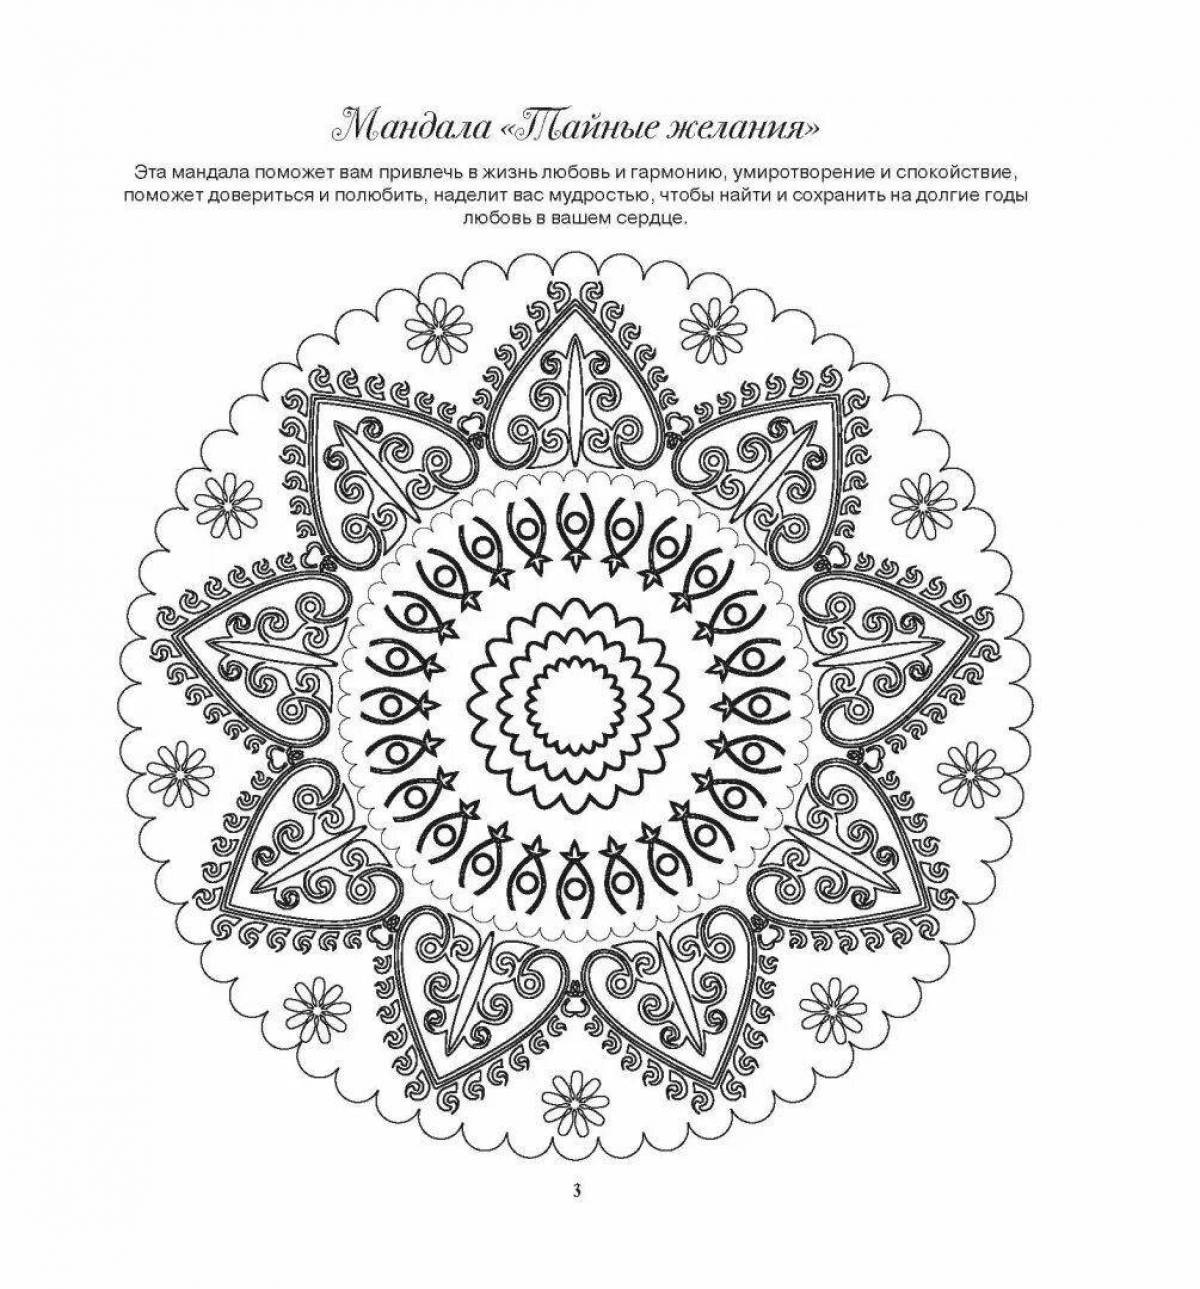 Great coloring mandala wishes fulfillment of desires